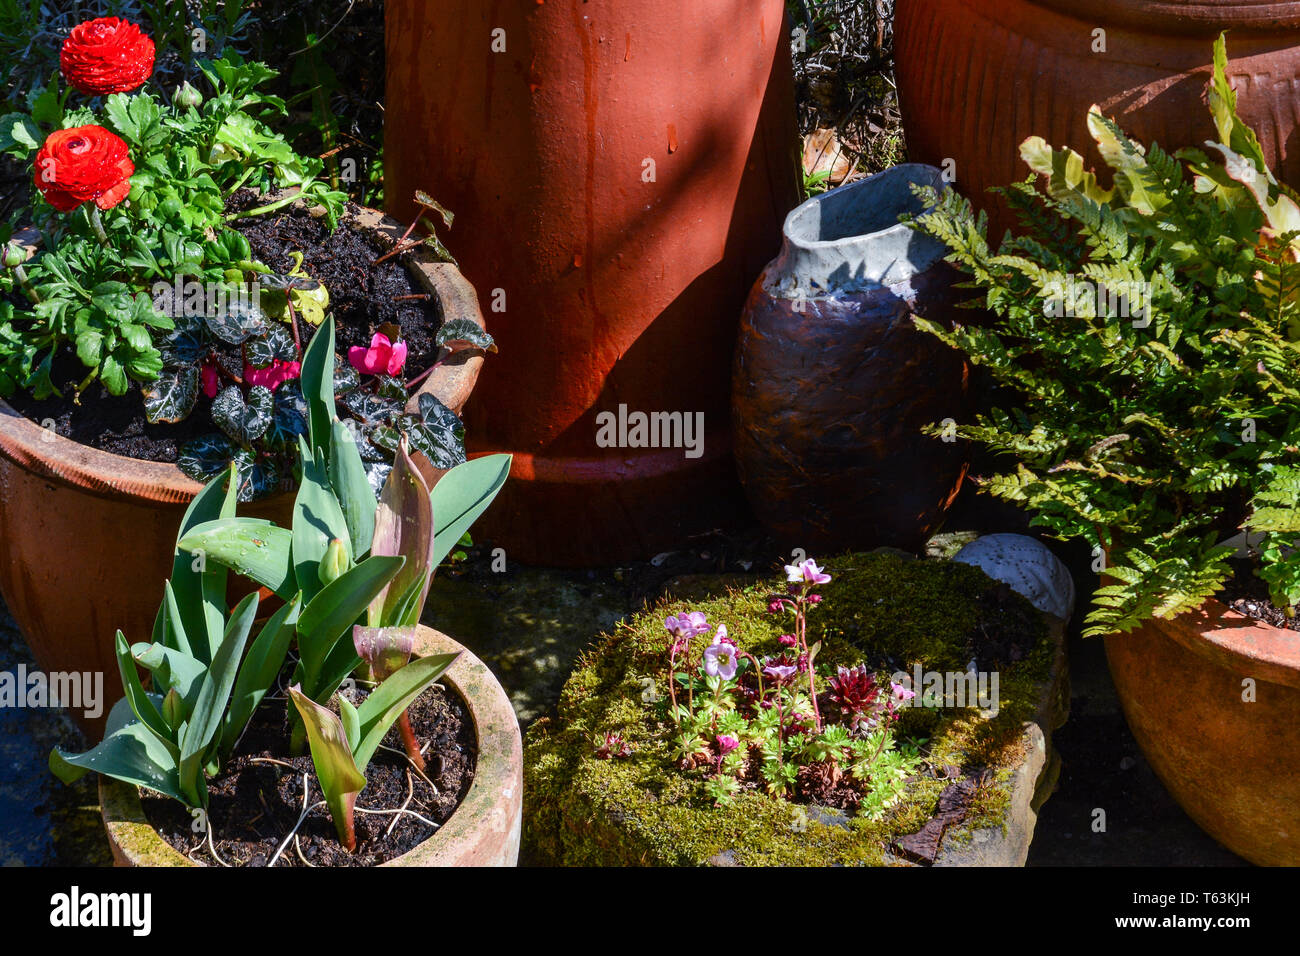 Potted plants outside on the garden patio Stock Photo